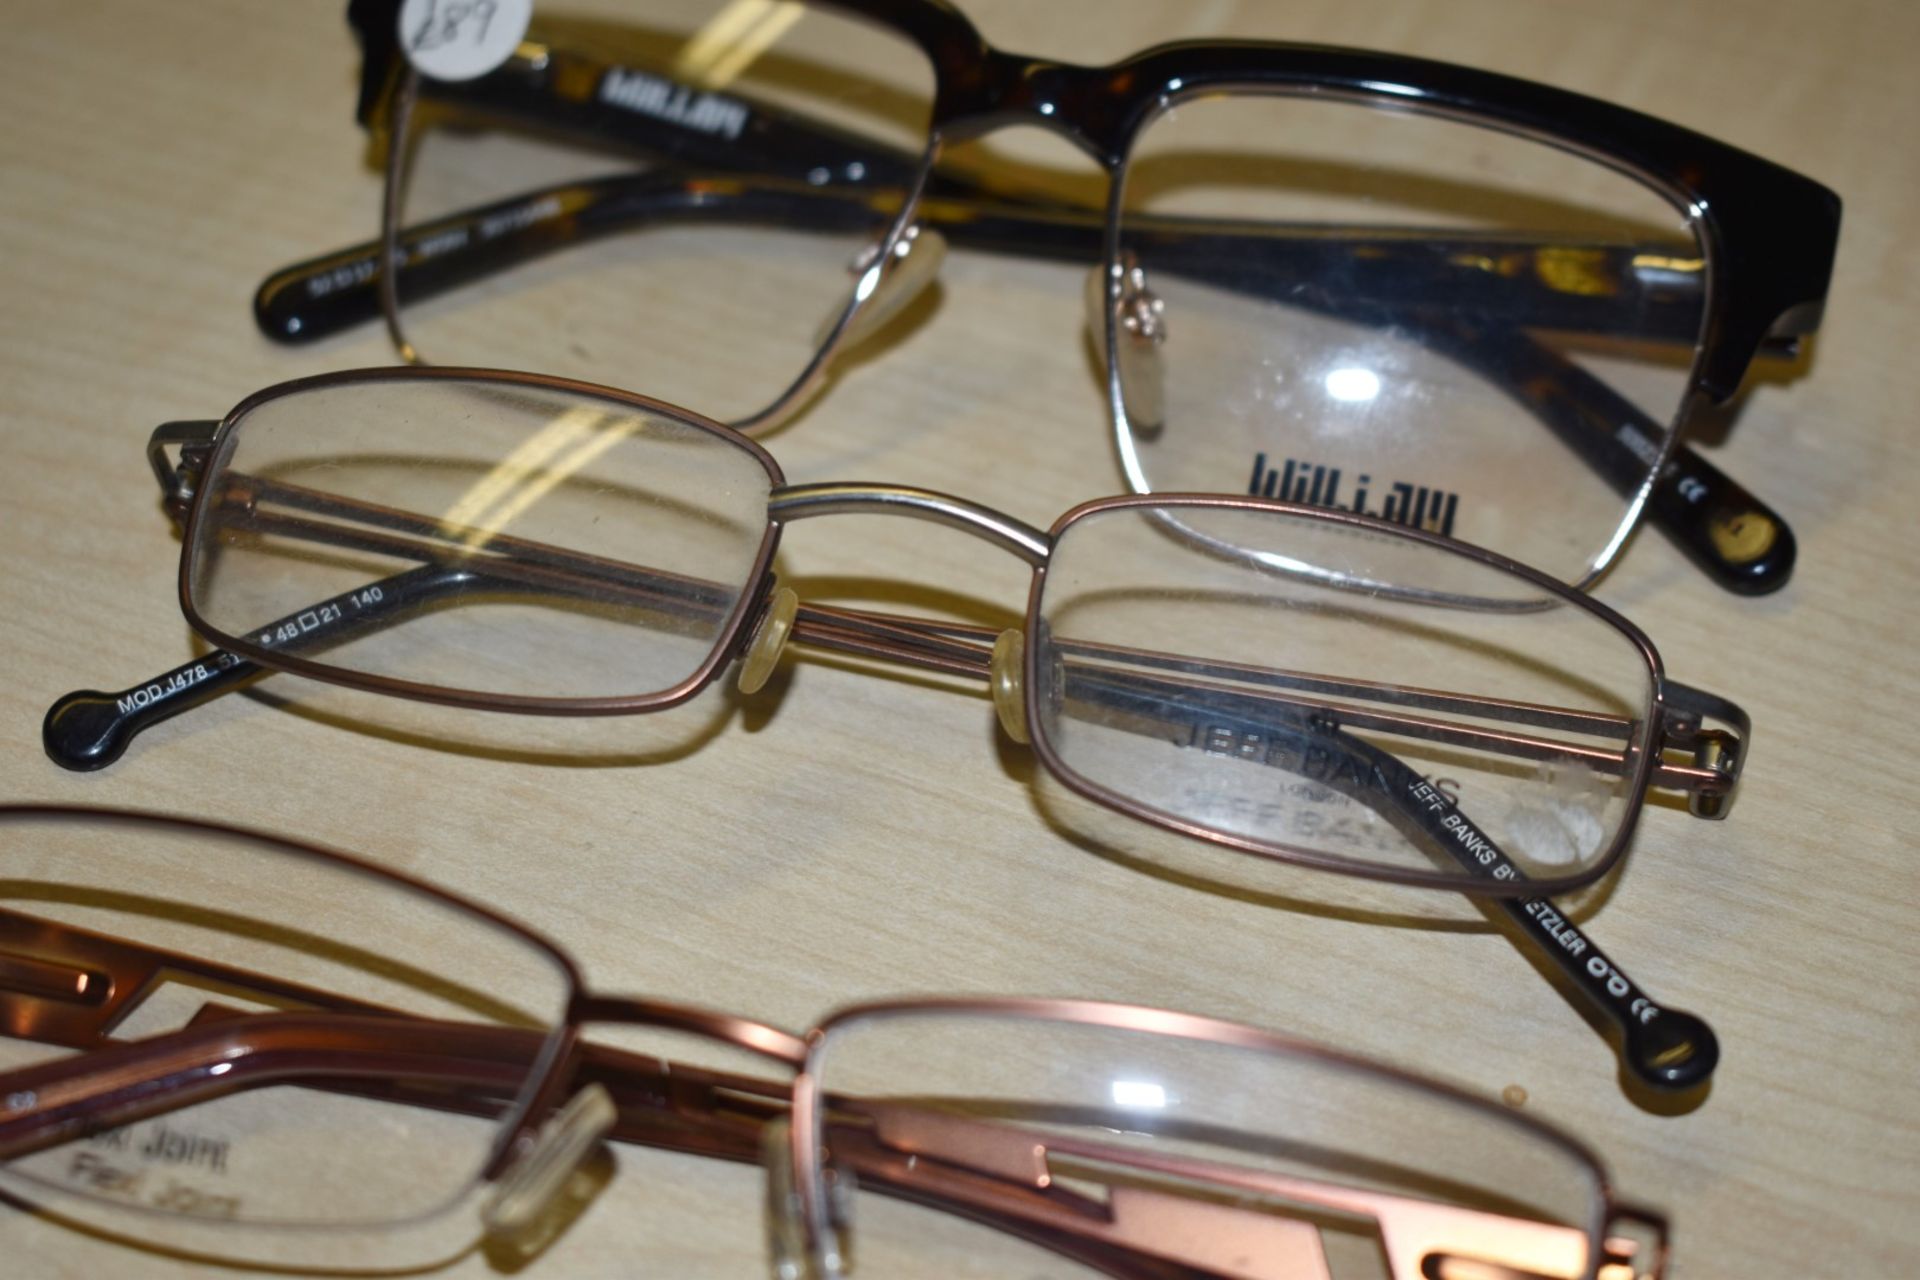 6 x Assorted Pairs of Designer Spectacle Eye Glasses - Ex Display Stock - Brands Include Jeff Banks, - Image 8 of 10